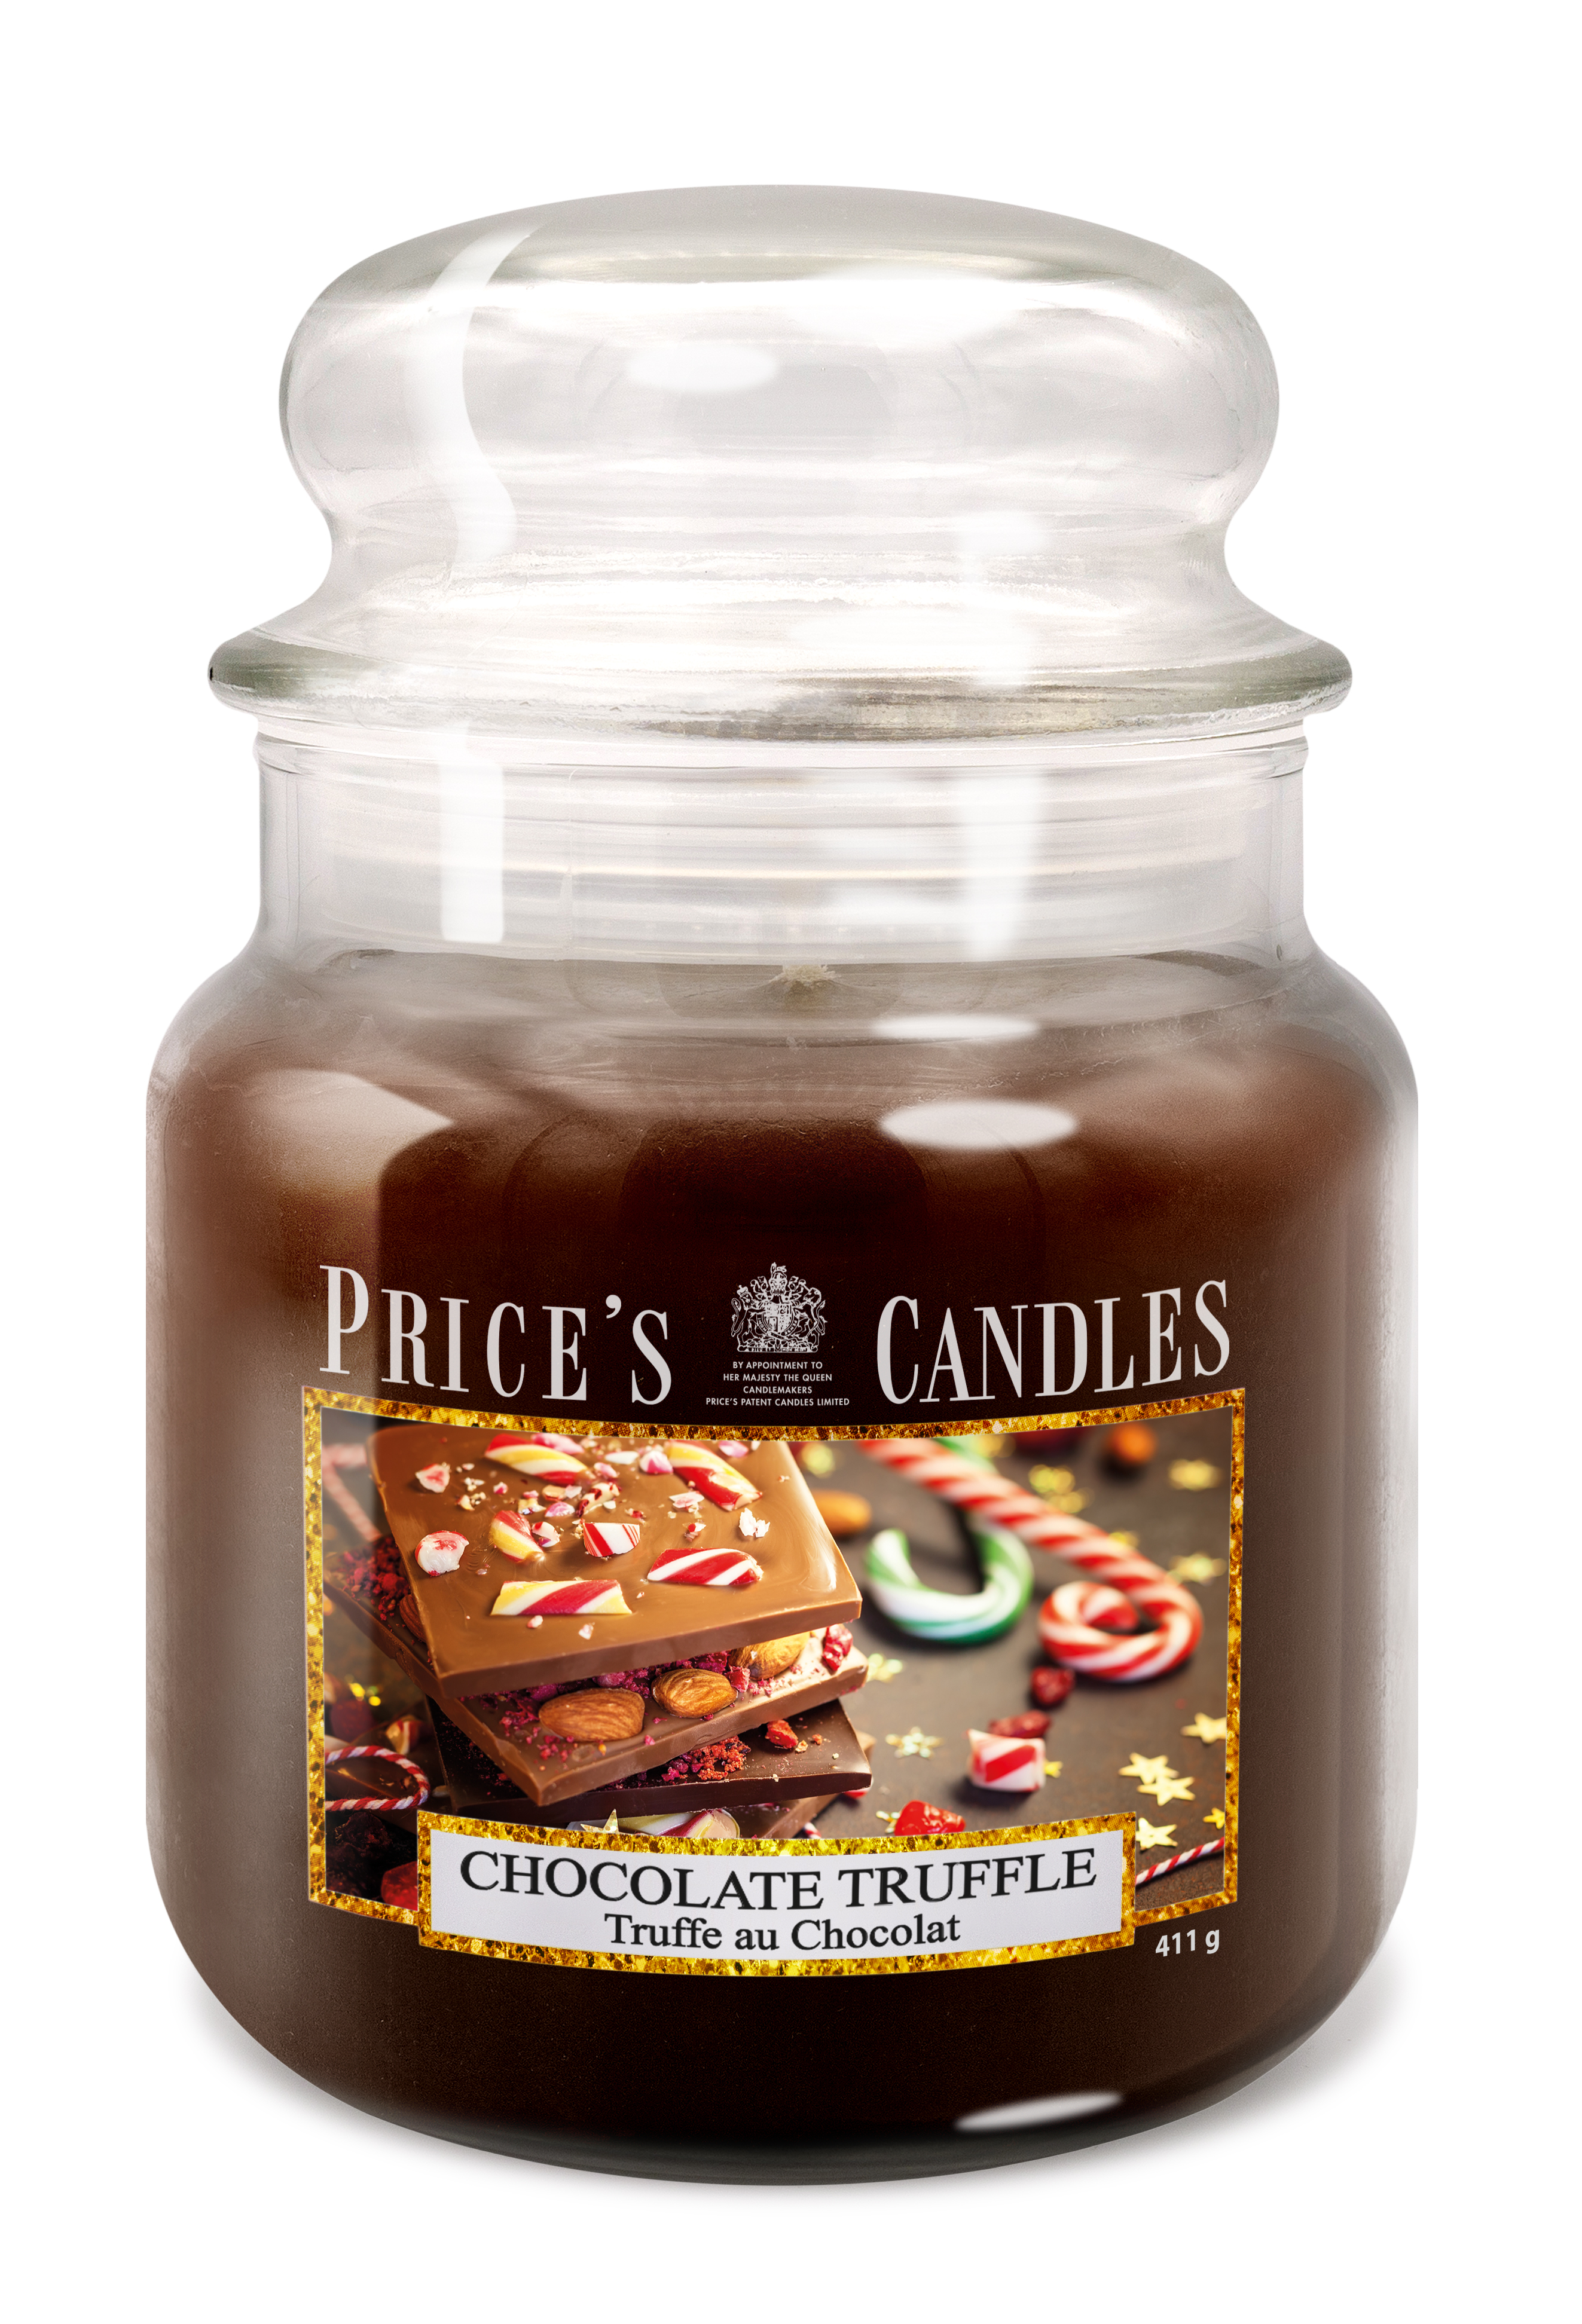 Prices Candle "Chocolate Truffle" 411g  